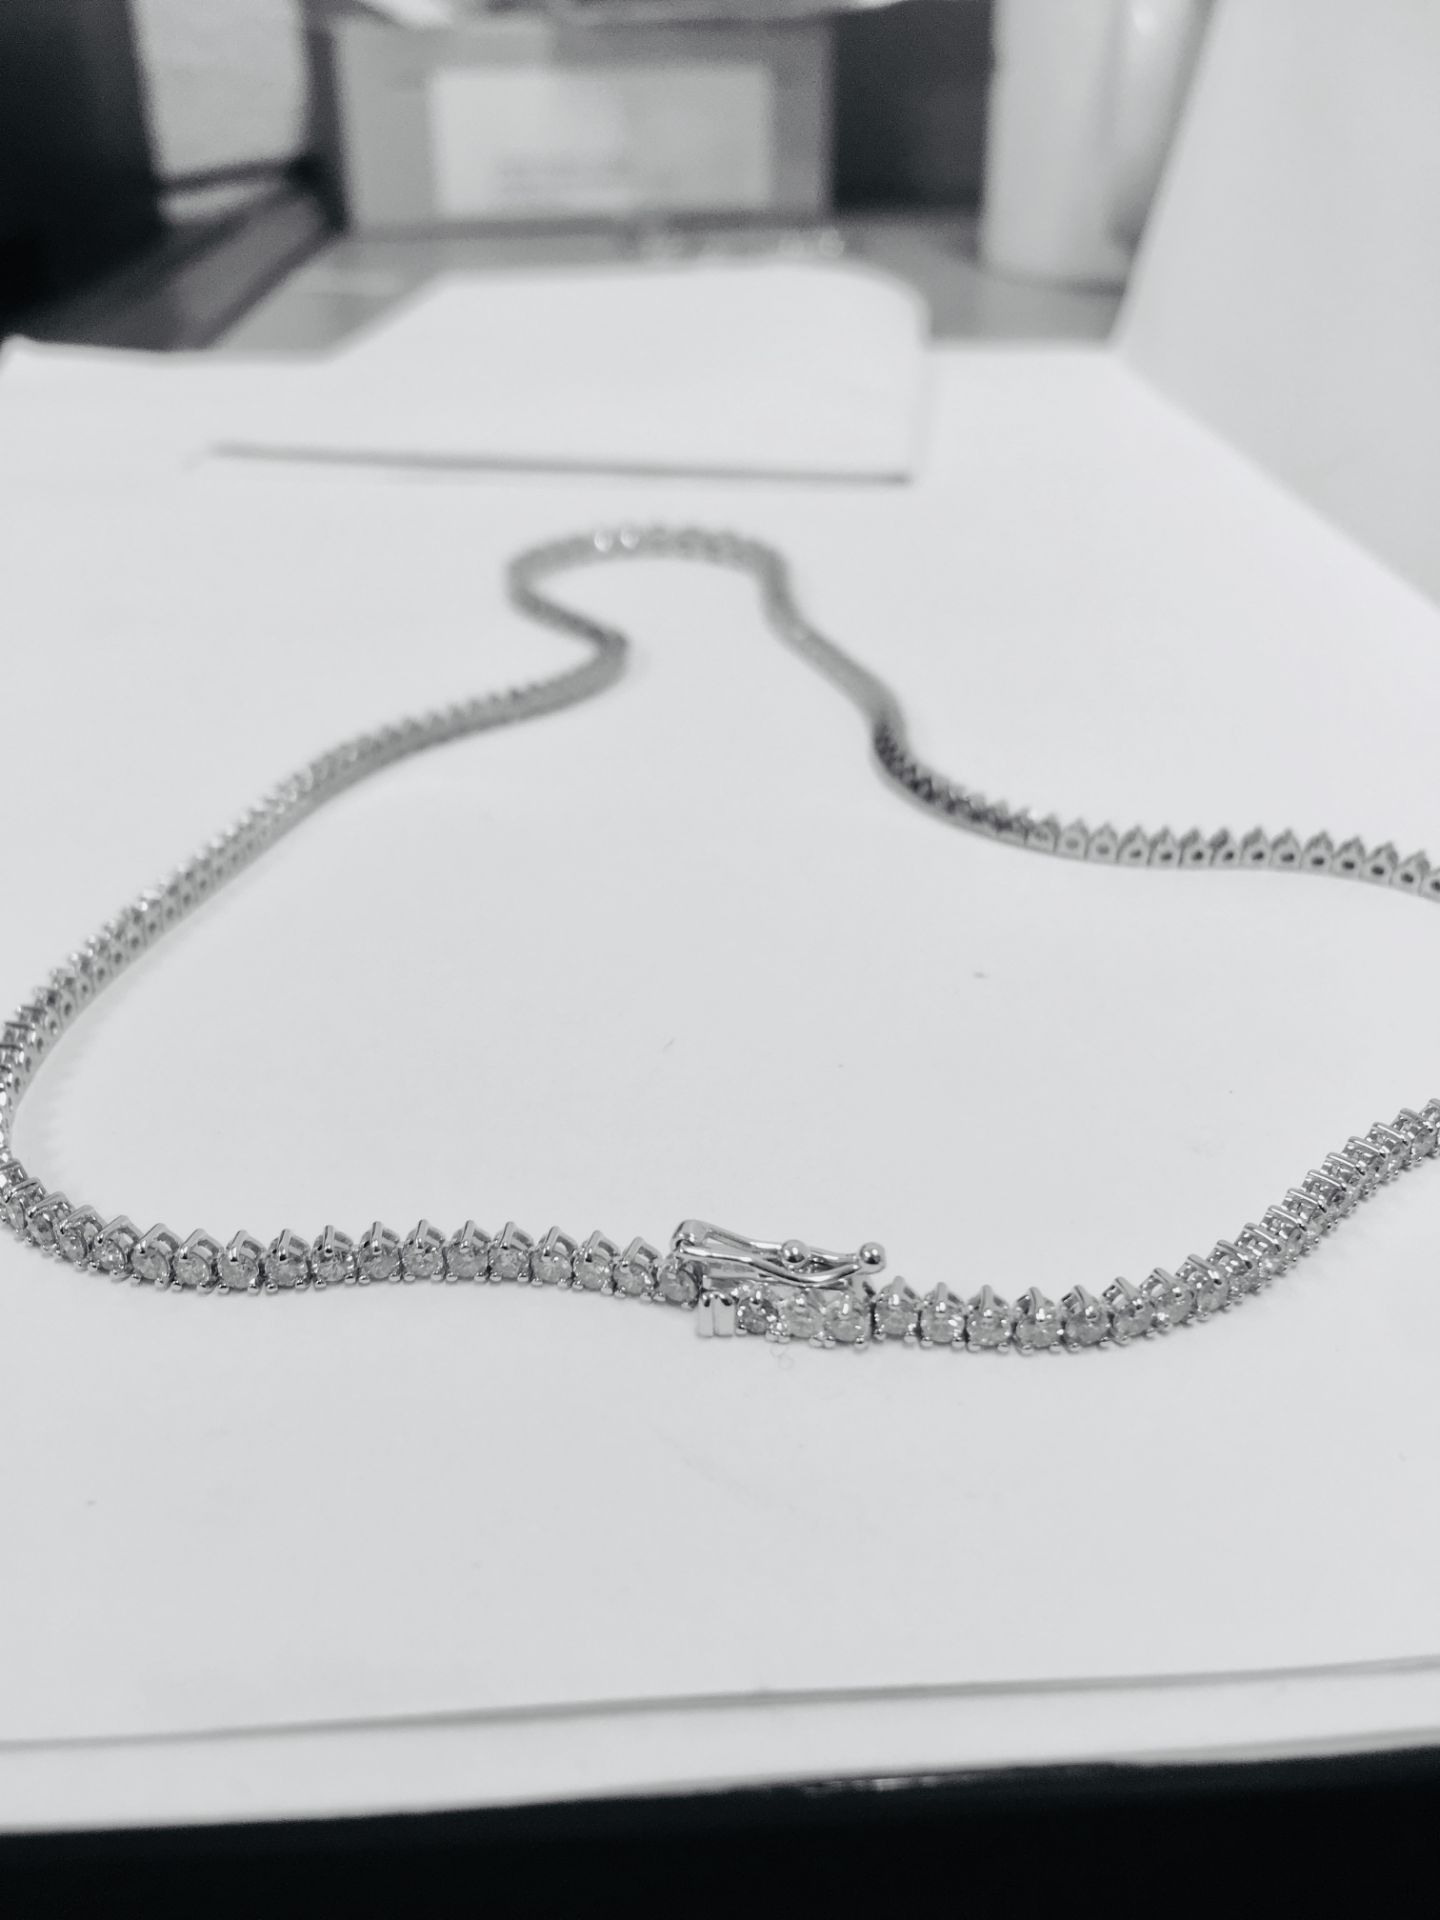 6.50ct Diamond tennis style necklace. 3 claw setting. Graduated diamonds, I colour, Si2 clarity - Image 4 of 5